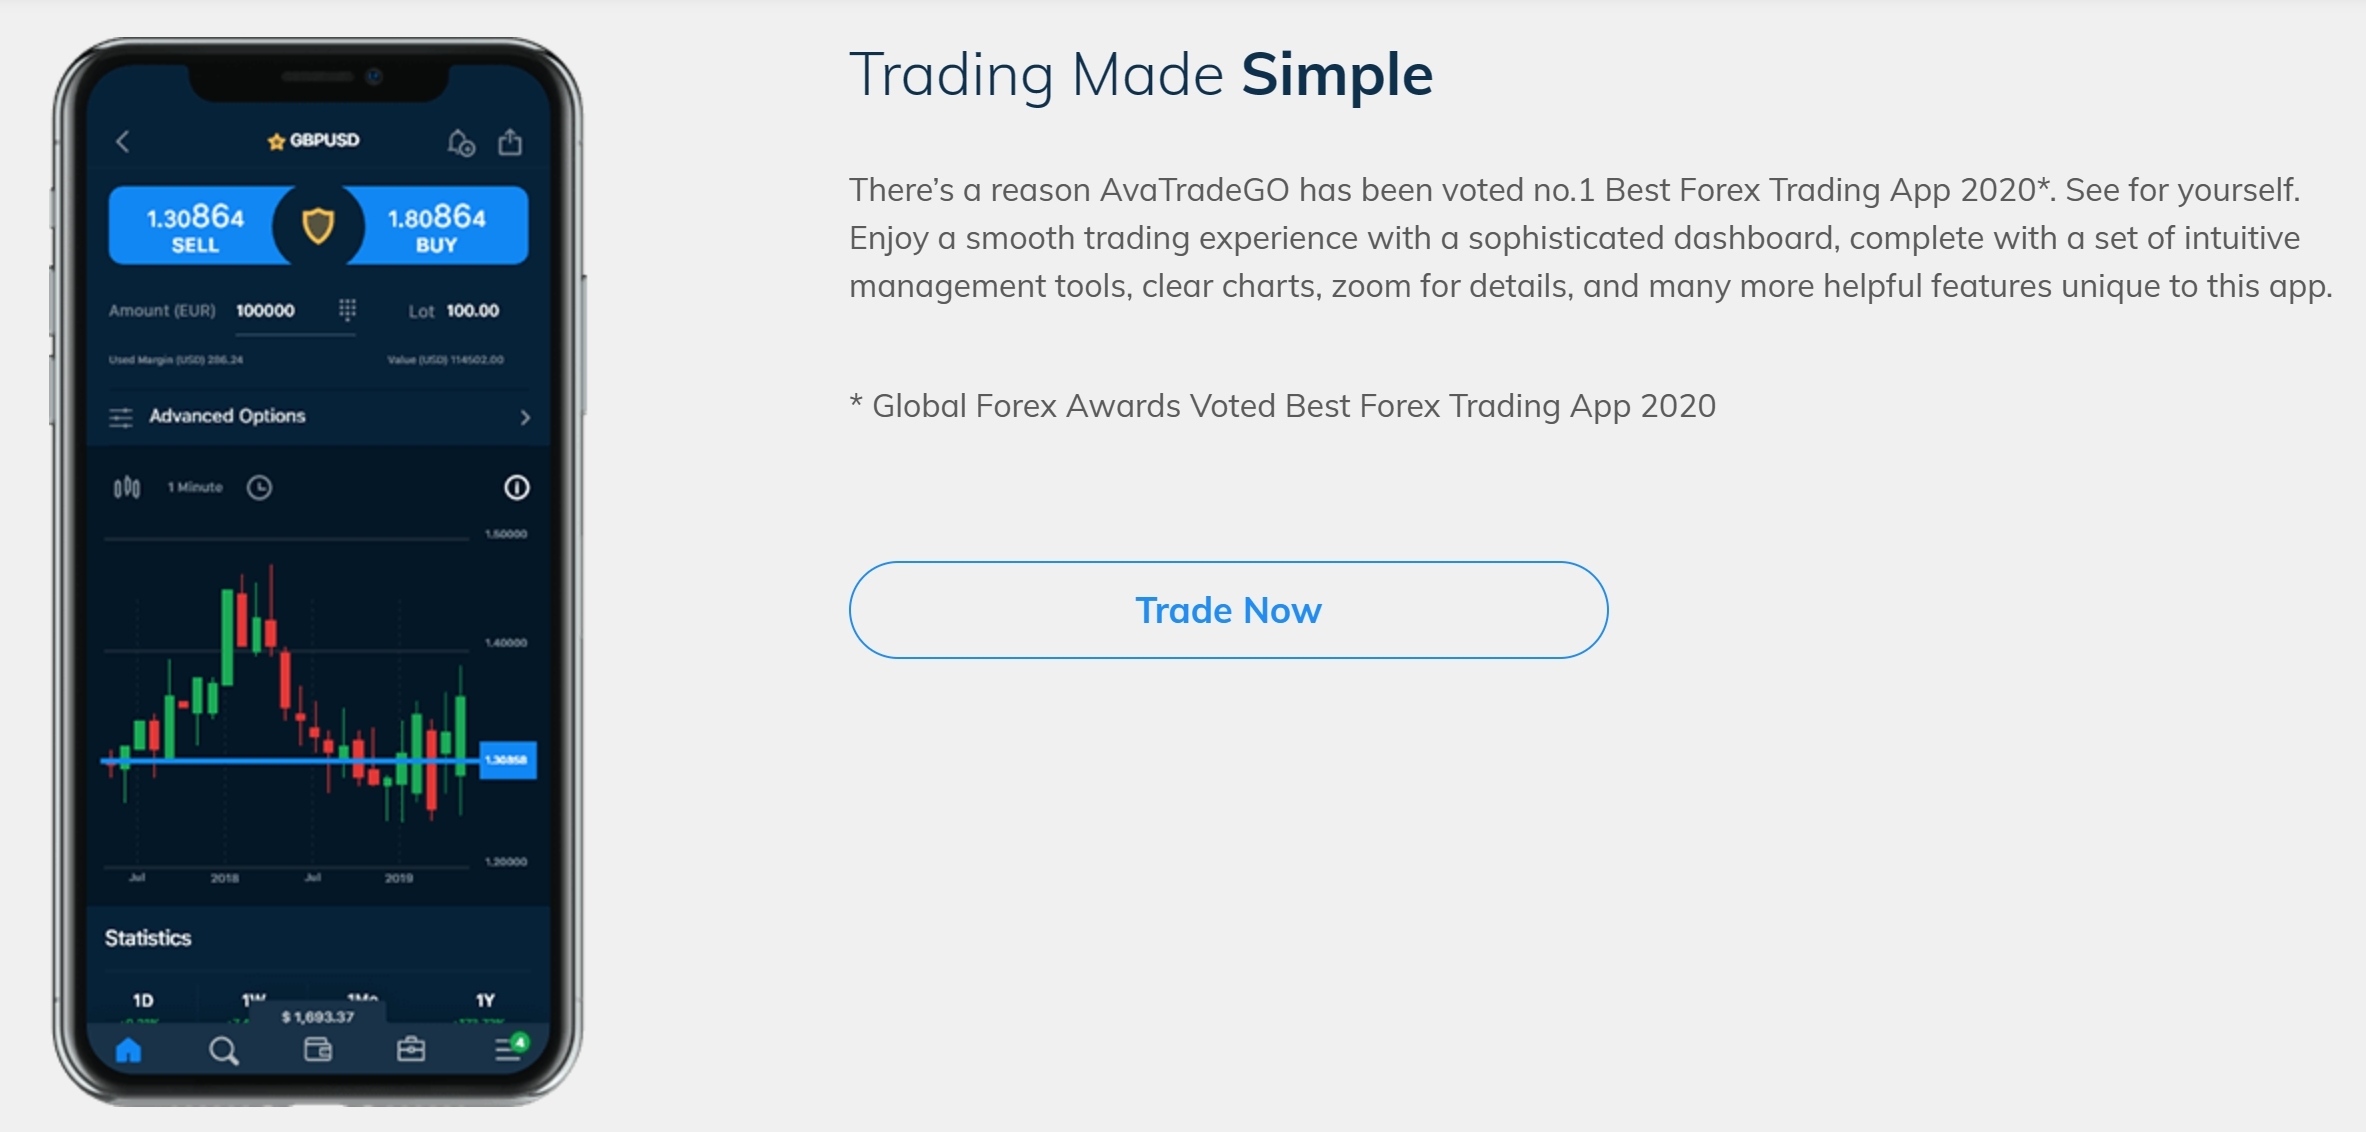 Trading Made Simple